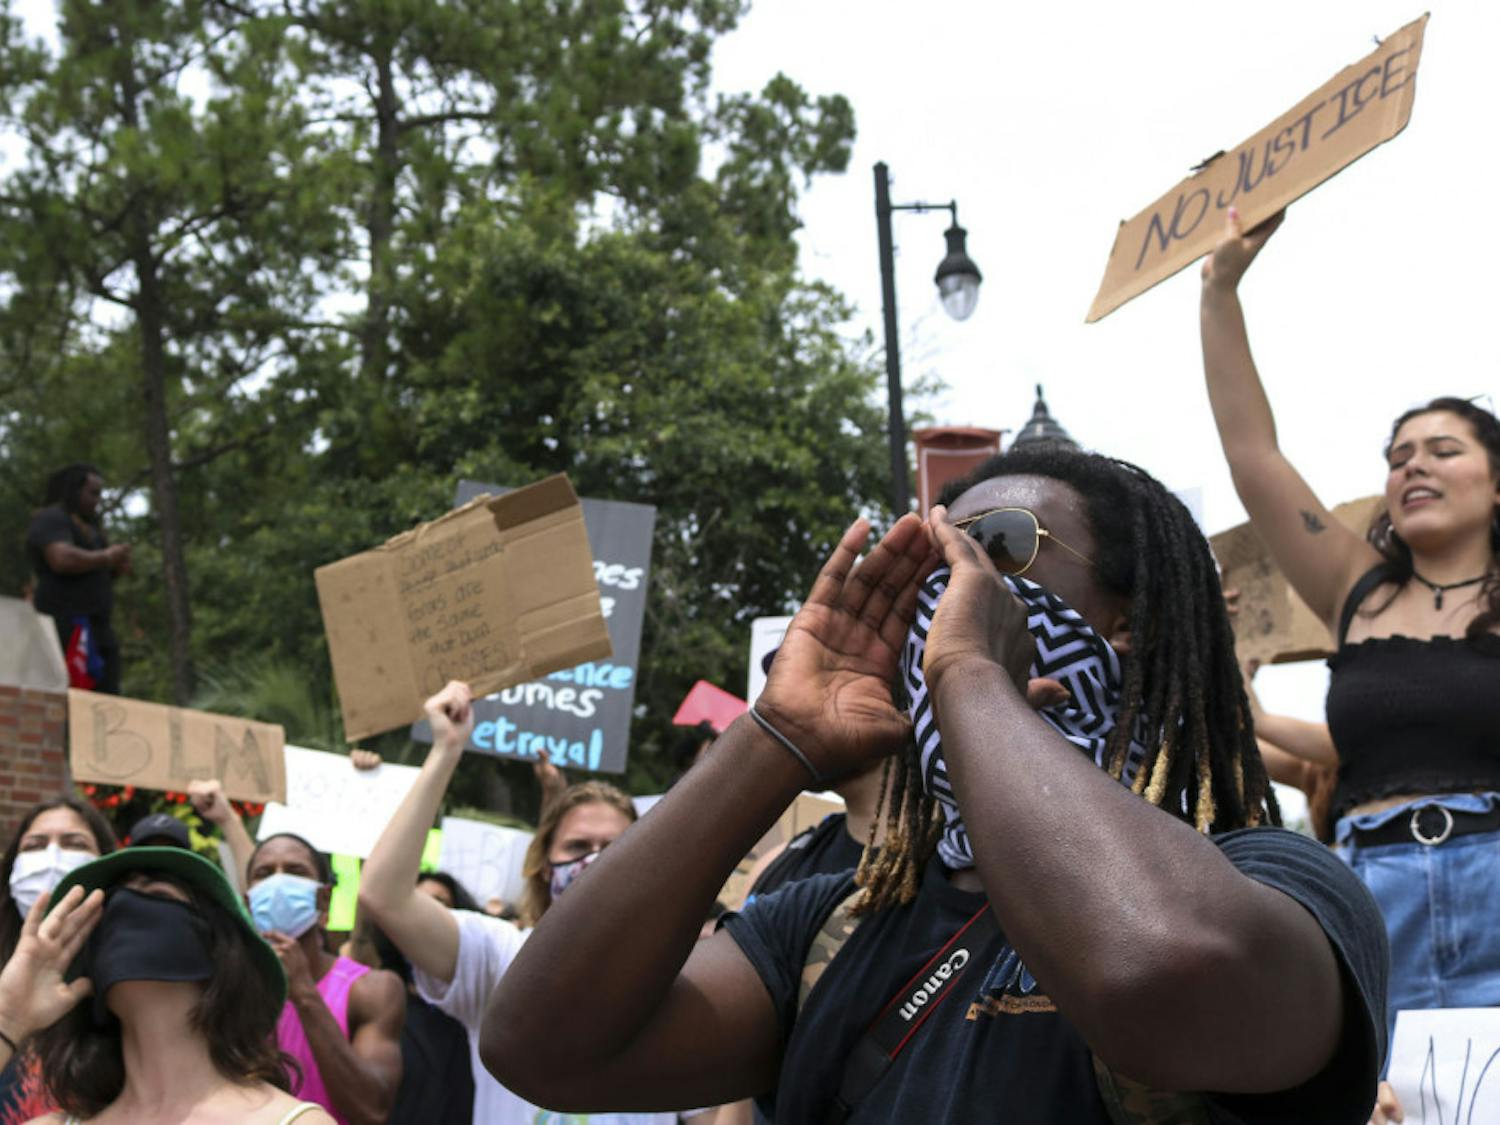 Morris McFadden, a 21-year-old telecommunications and production major and one of the organizers of the protest, shouts with the crowd of about 100 people June 3 at the intersection of 13th Street and University Avenue as part of a protest against police brutality.
&nbsp;